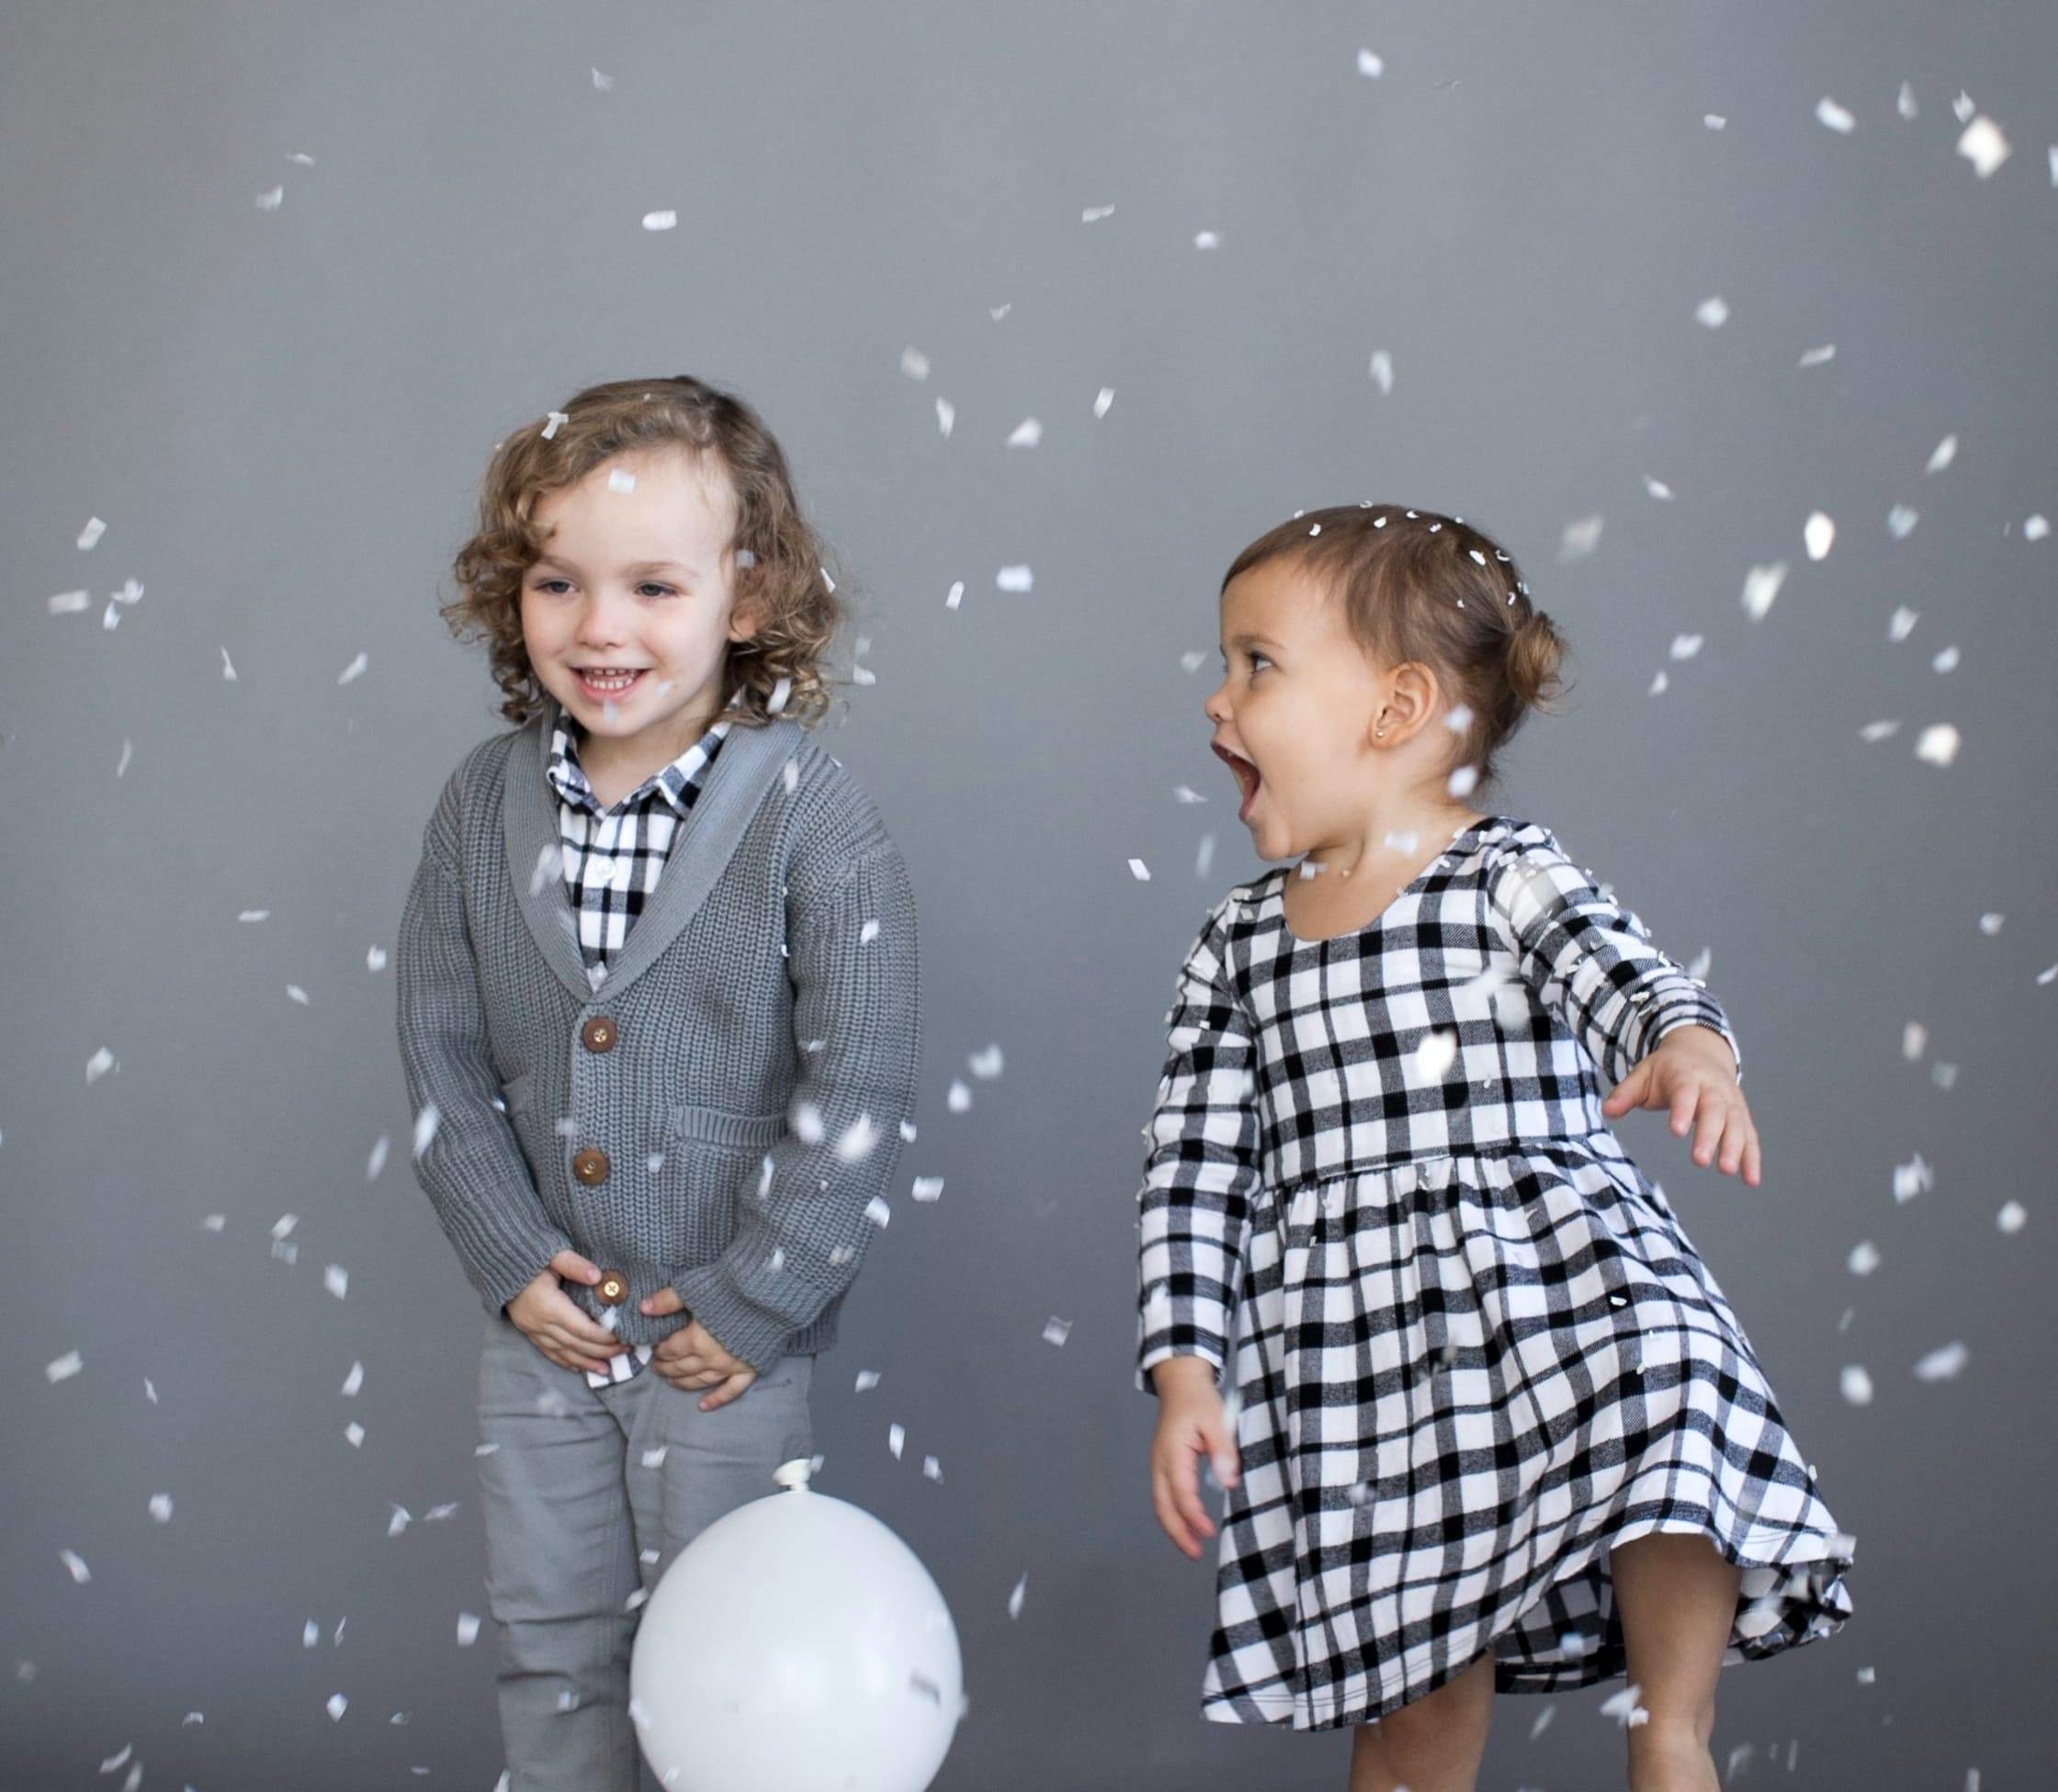 7 Tips for the Perfect DIY Christmas Pictures